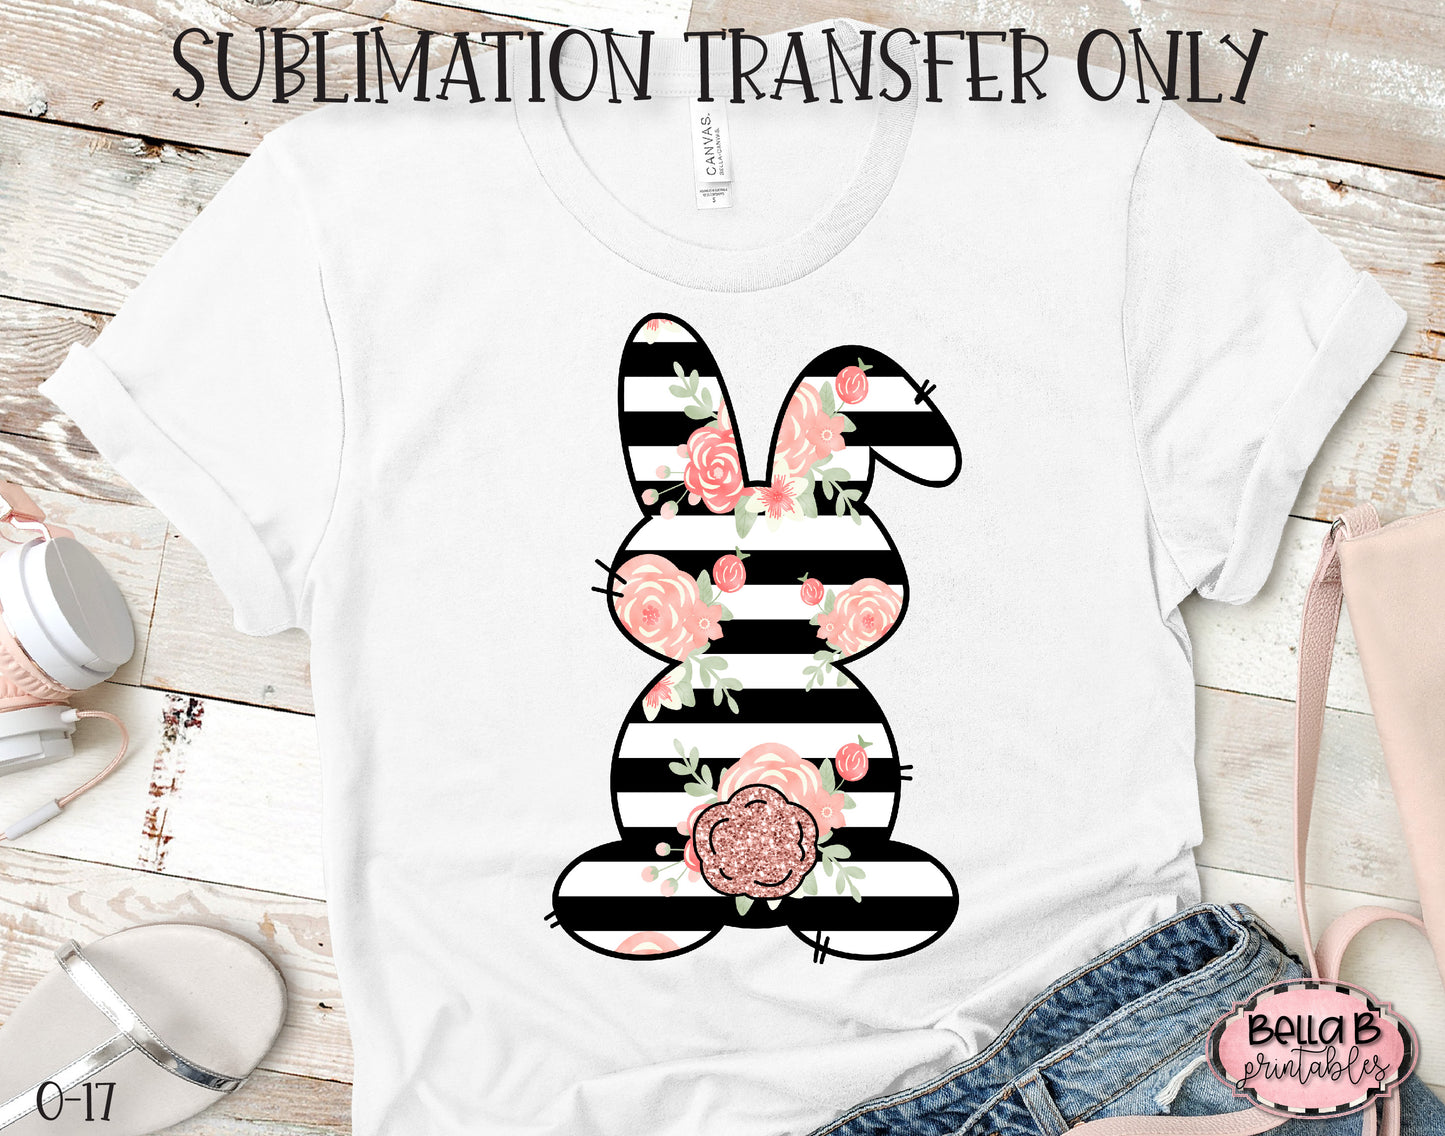 Black Striped Floral Easter Bunny Sublimation Transfer, Ready To Press, Heat Press Transfer, Sublimation Print